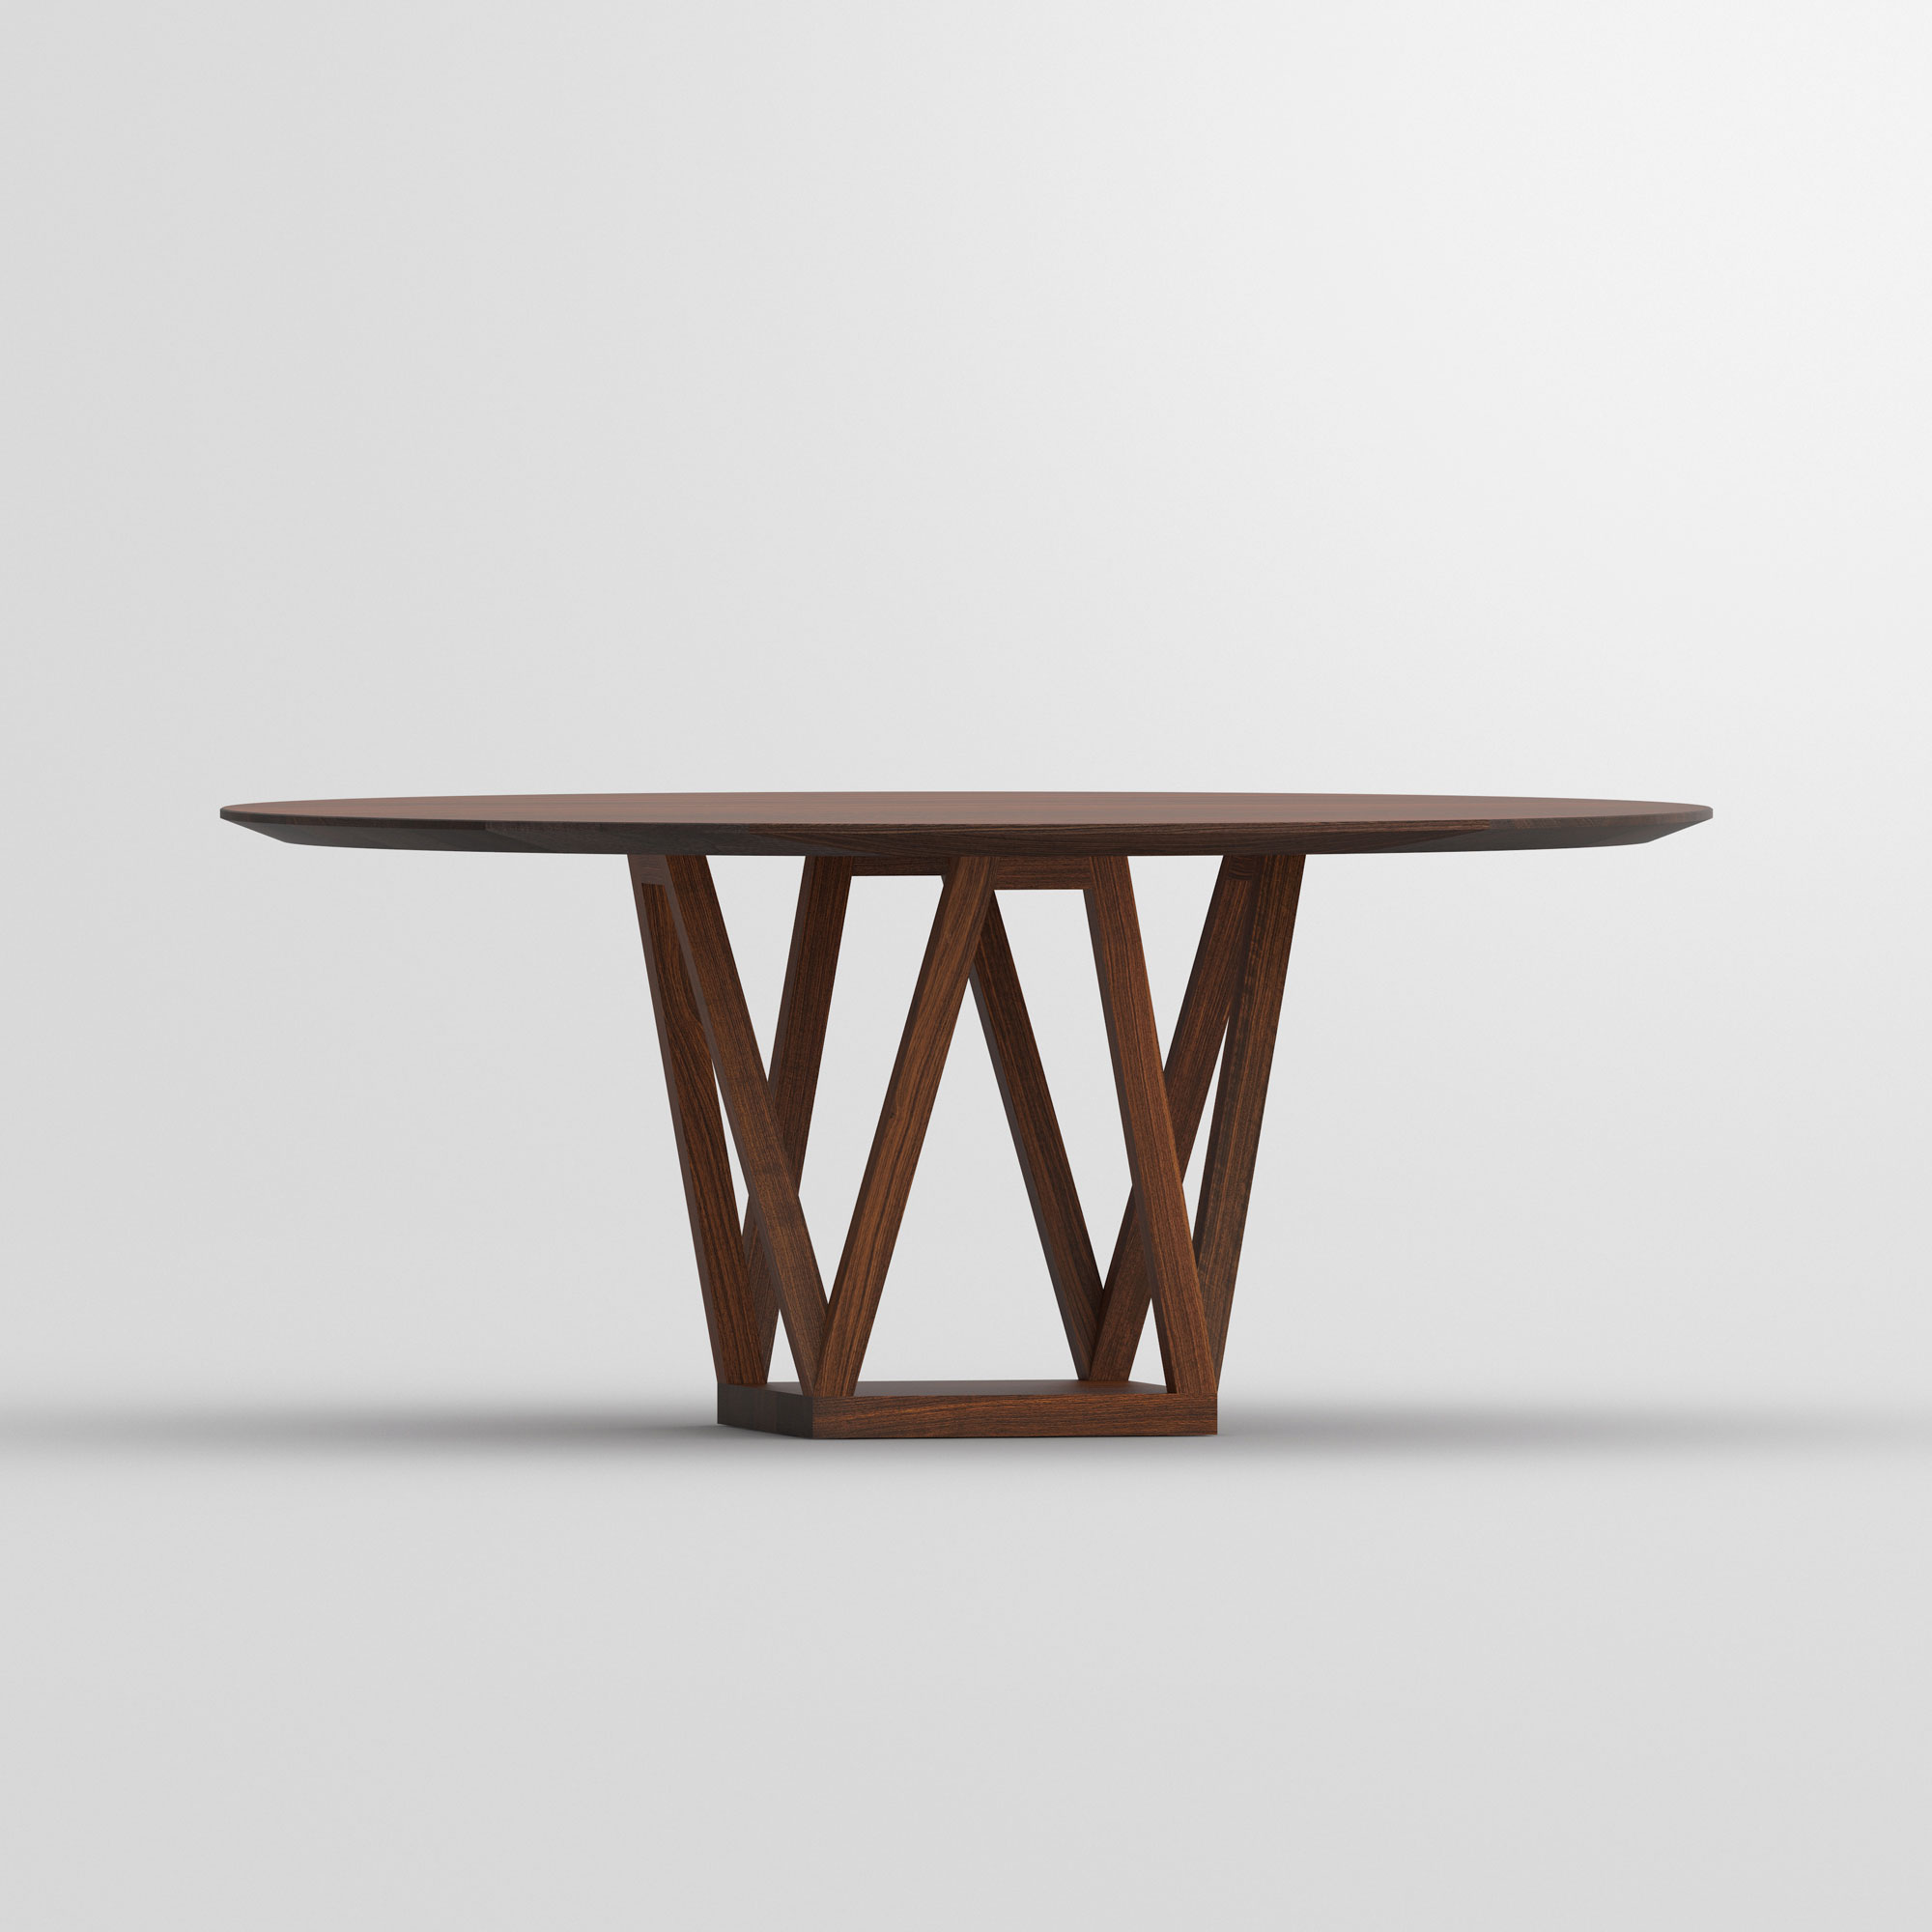 Round Designer Table CREO cam2 custom made in solid wood by vitamin design